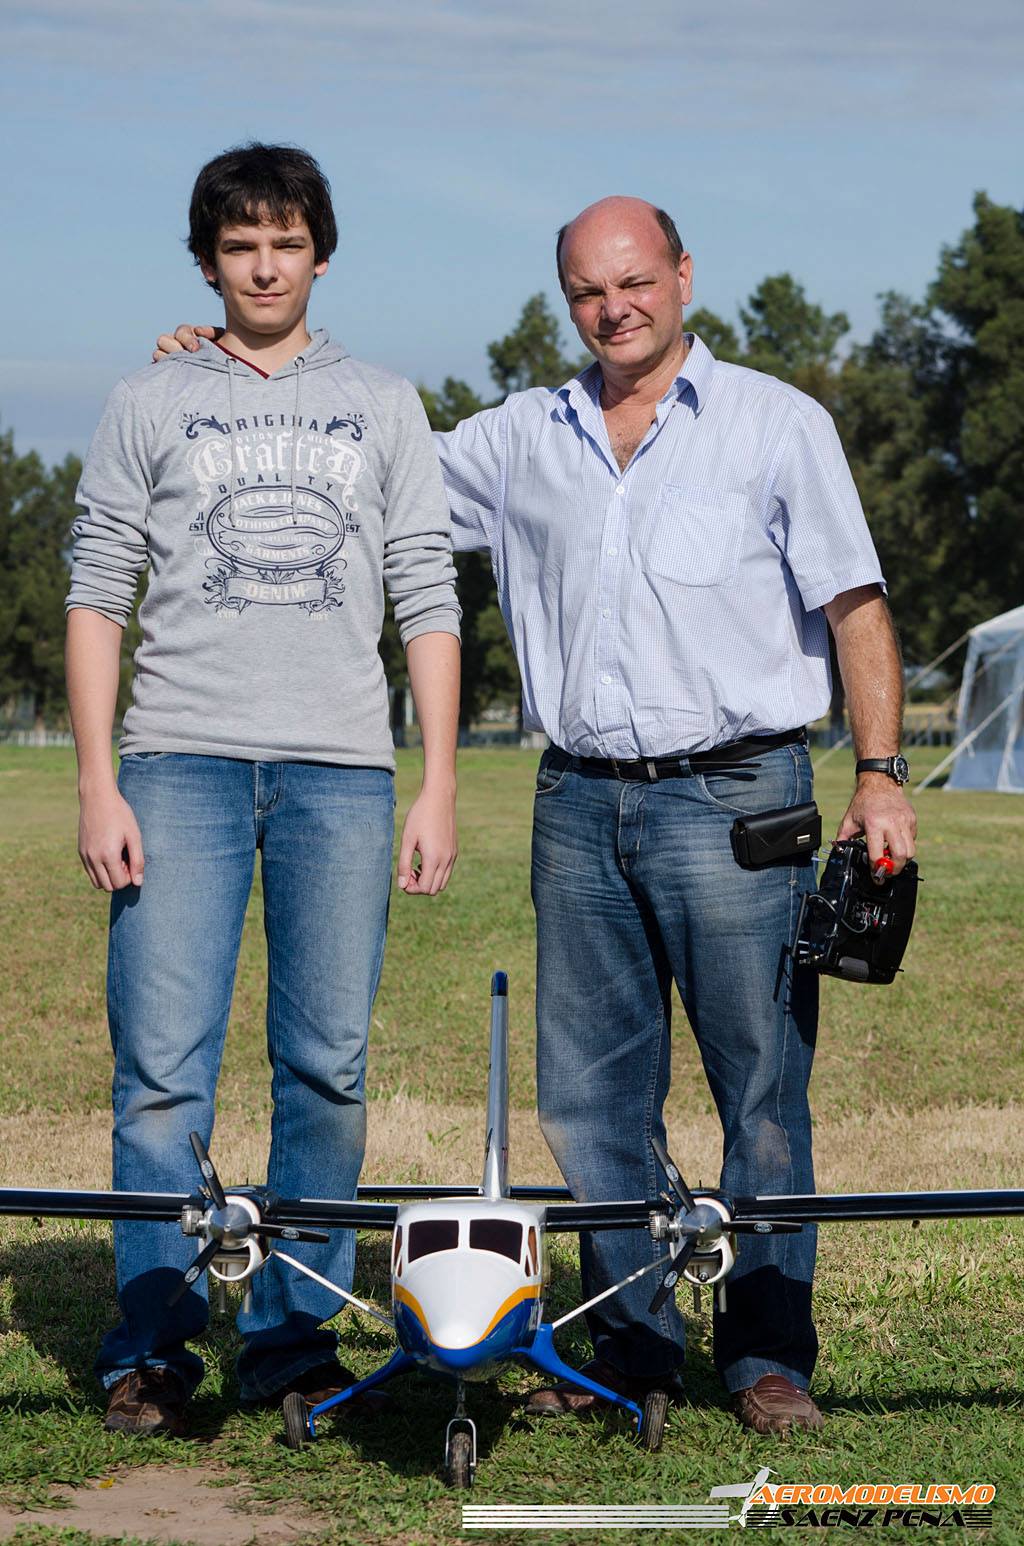 Two people standing together with a drone.